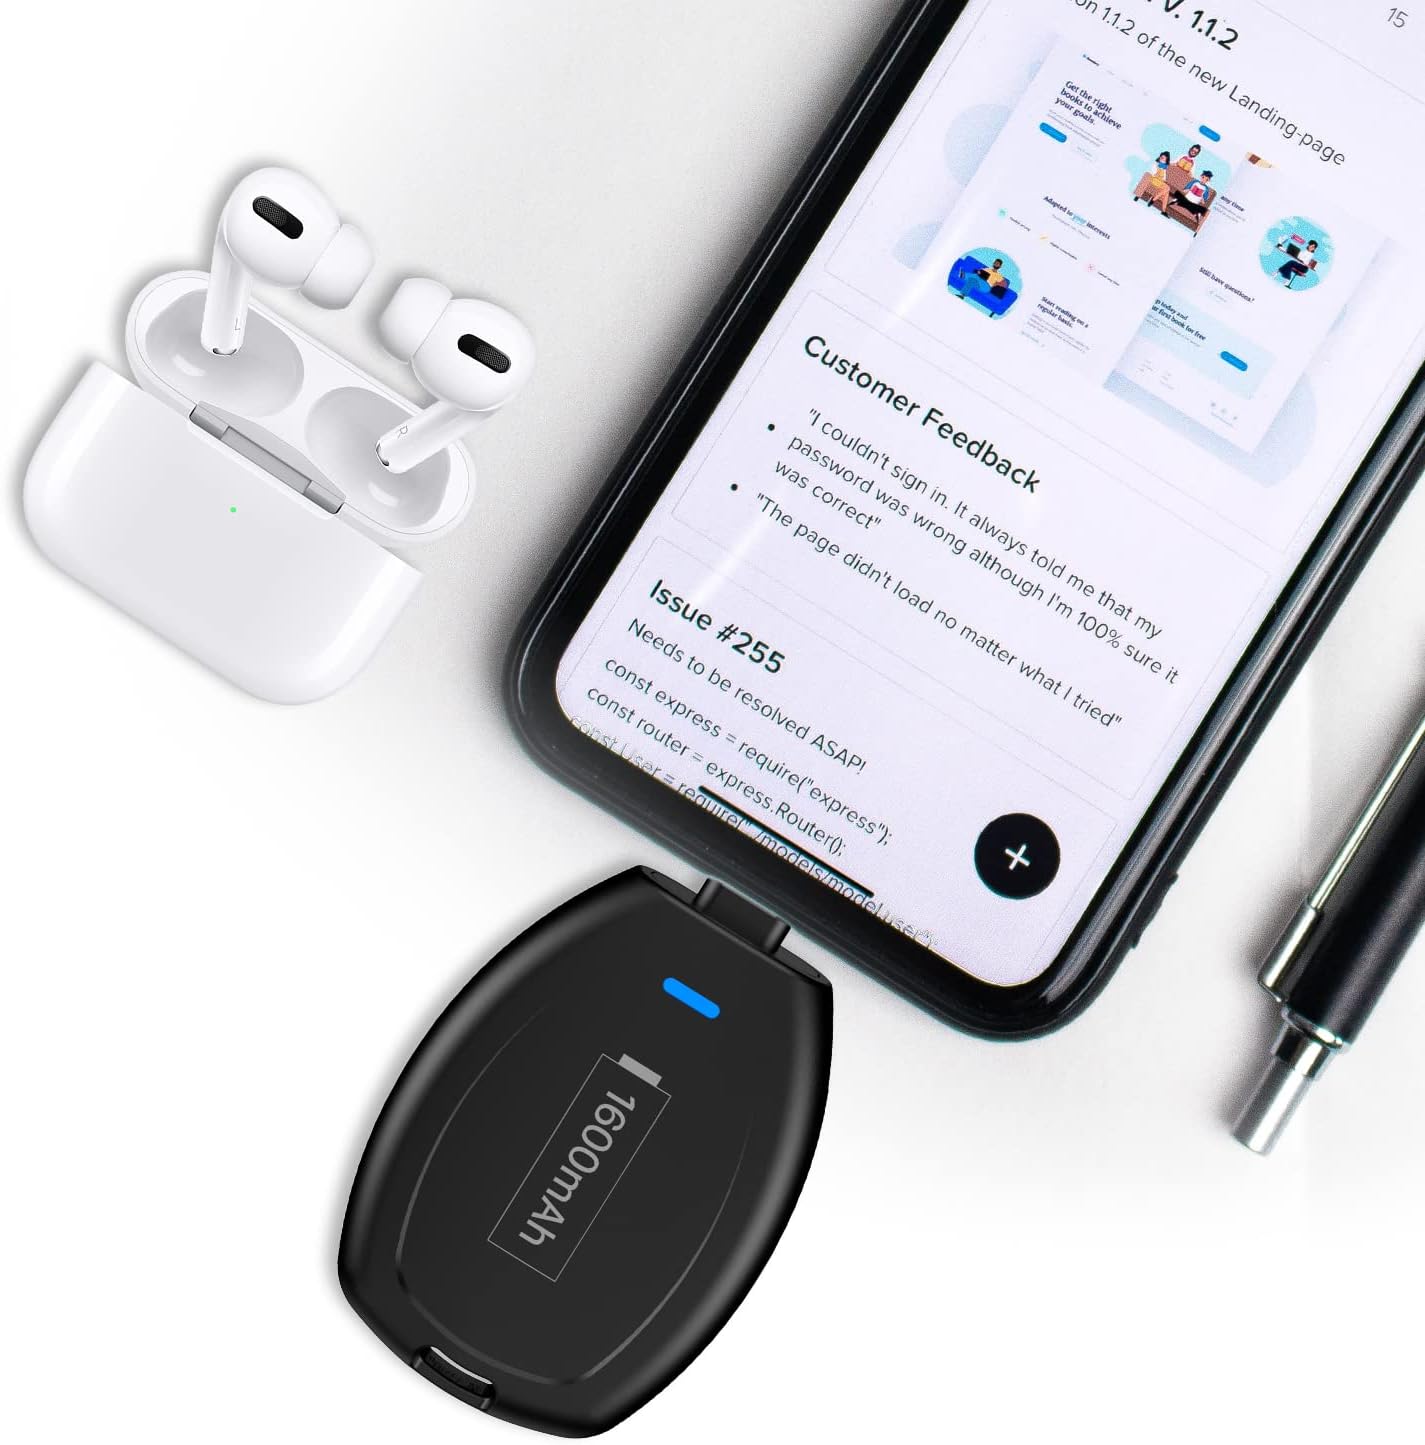 Keychain Portable Charger for iPhone, Mini Power Bank Subcompact Emergency Power Pod External Fast Charging Battery Pack, 1600mAh Key Ring cell Phone Charger for iPhone 14/13/12/11/Pro Max/X/8/7/6s/SE